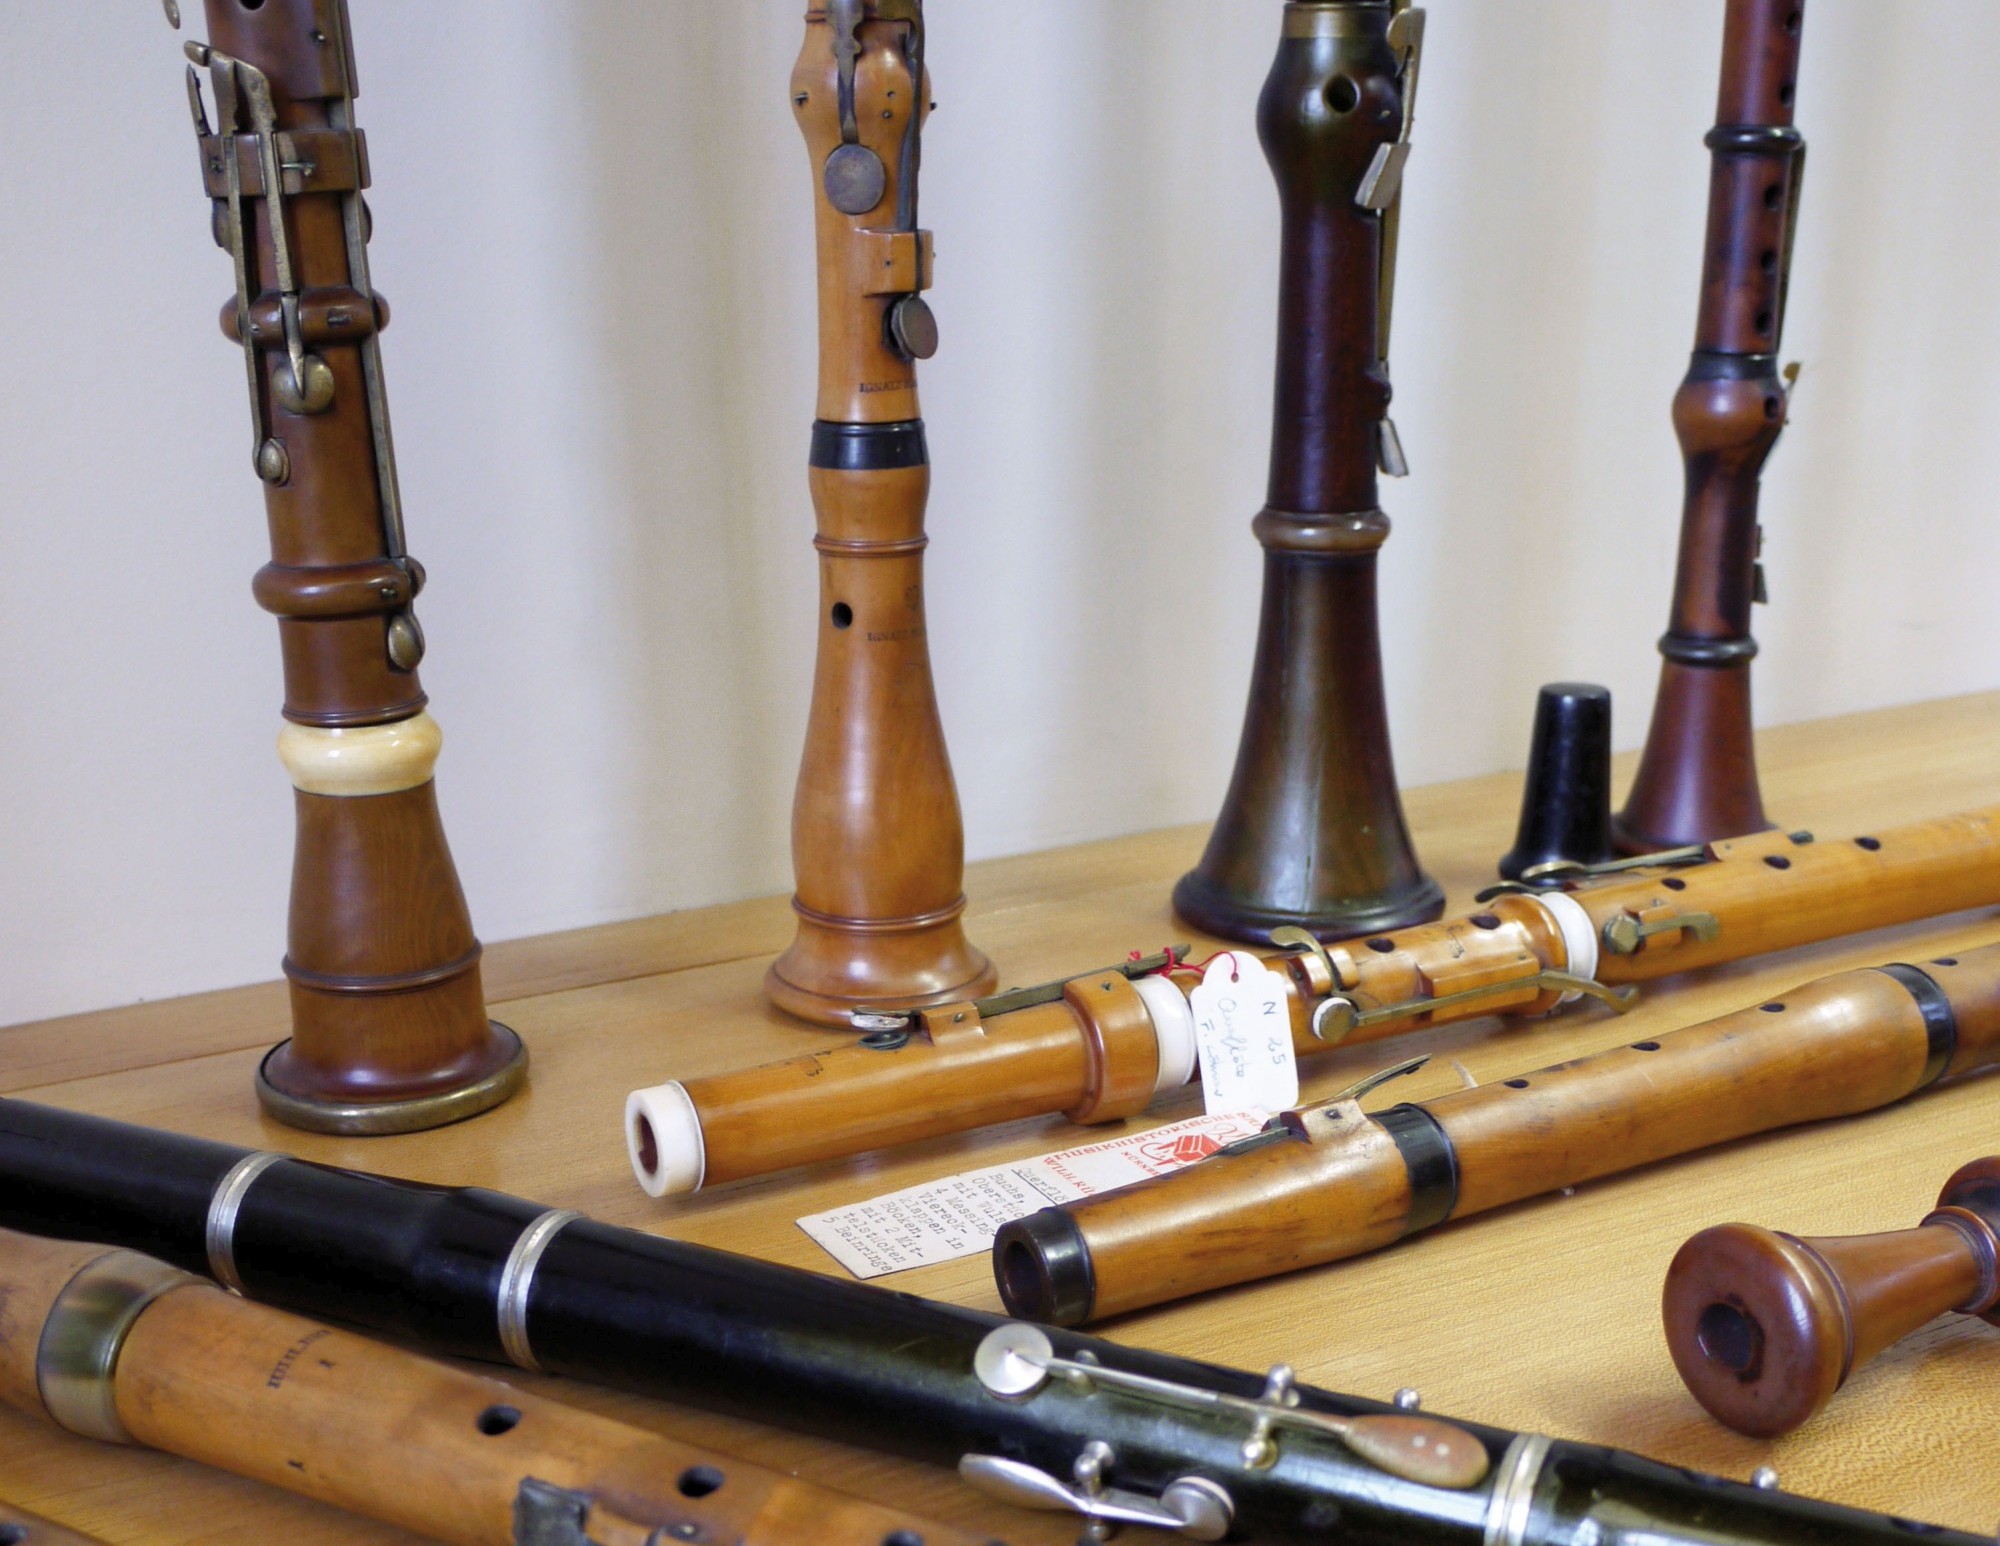 Baroque flutes, oboes and clarinets donated to the collection by Reinhold Neupert and Ulrich Rück (Image: Isi Kunath)